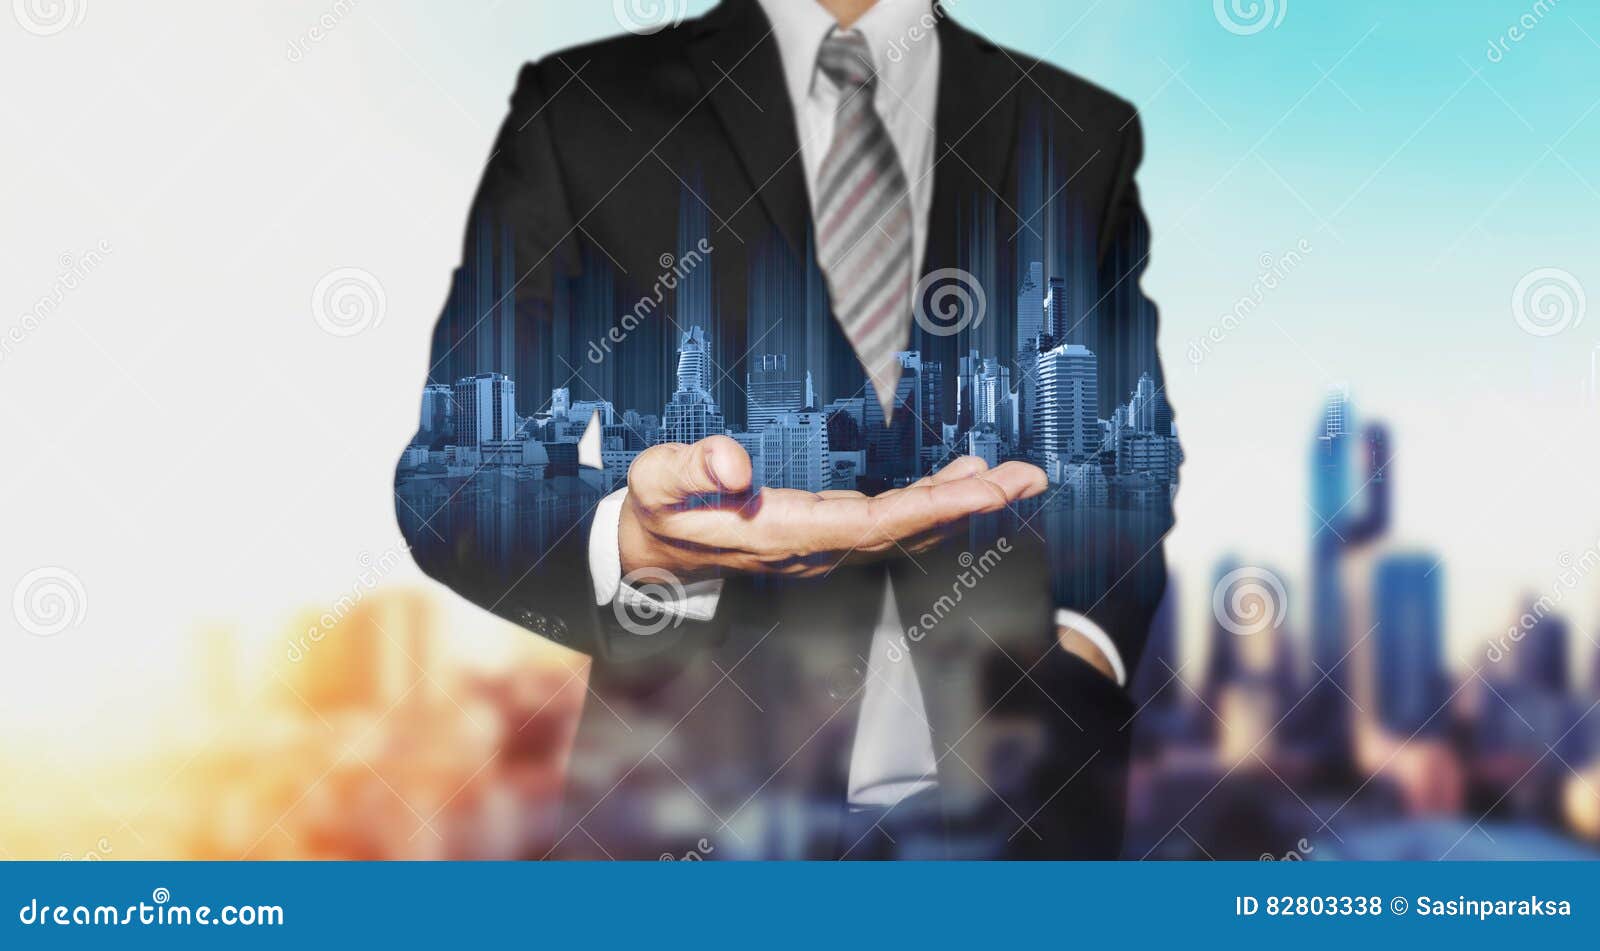 businessman holding blue modern buildings hologram on hand, with black and white city background